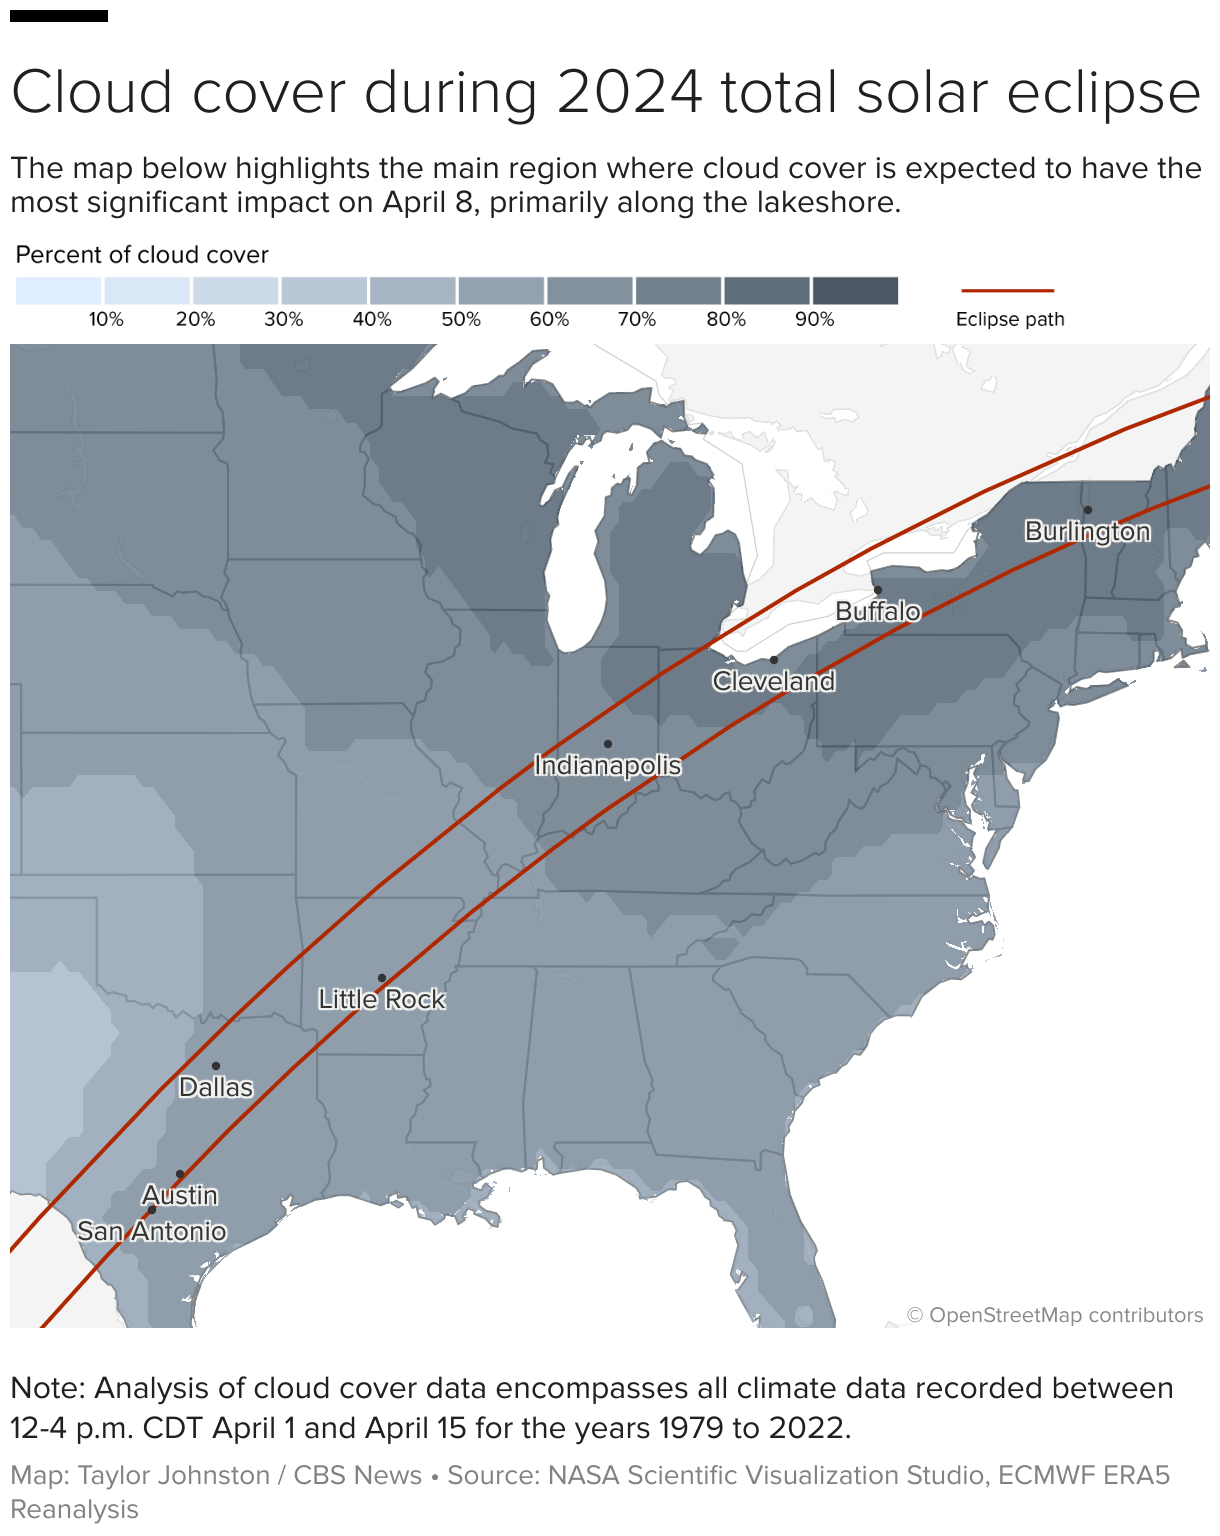 United States map showing the percent of cloud cover in various regions of the eclipse path on April 8. The lakeshore region will be primarily affected. 